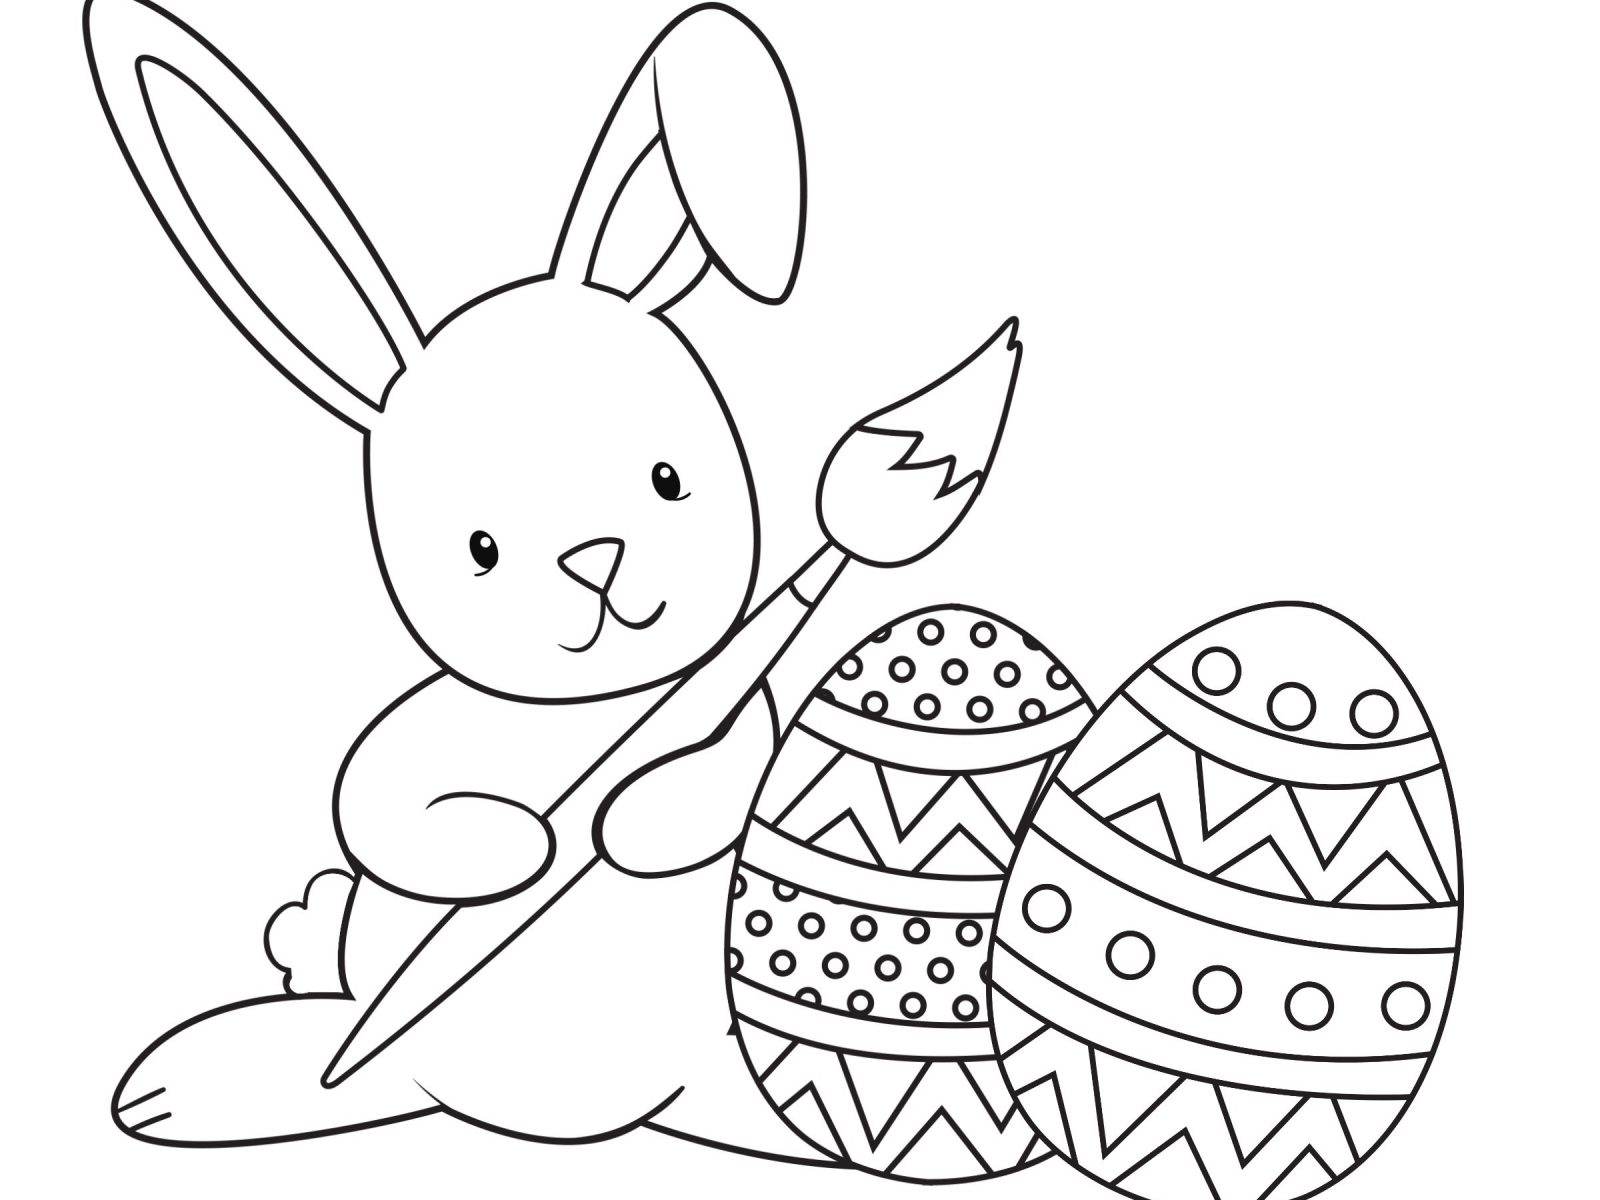 Easy Easter Bunny Coloring Pages at GetColorings.com ...